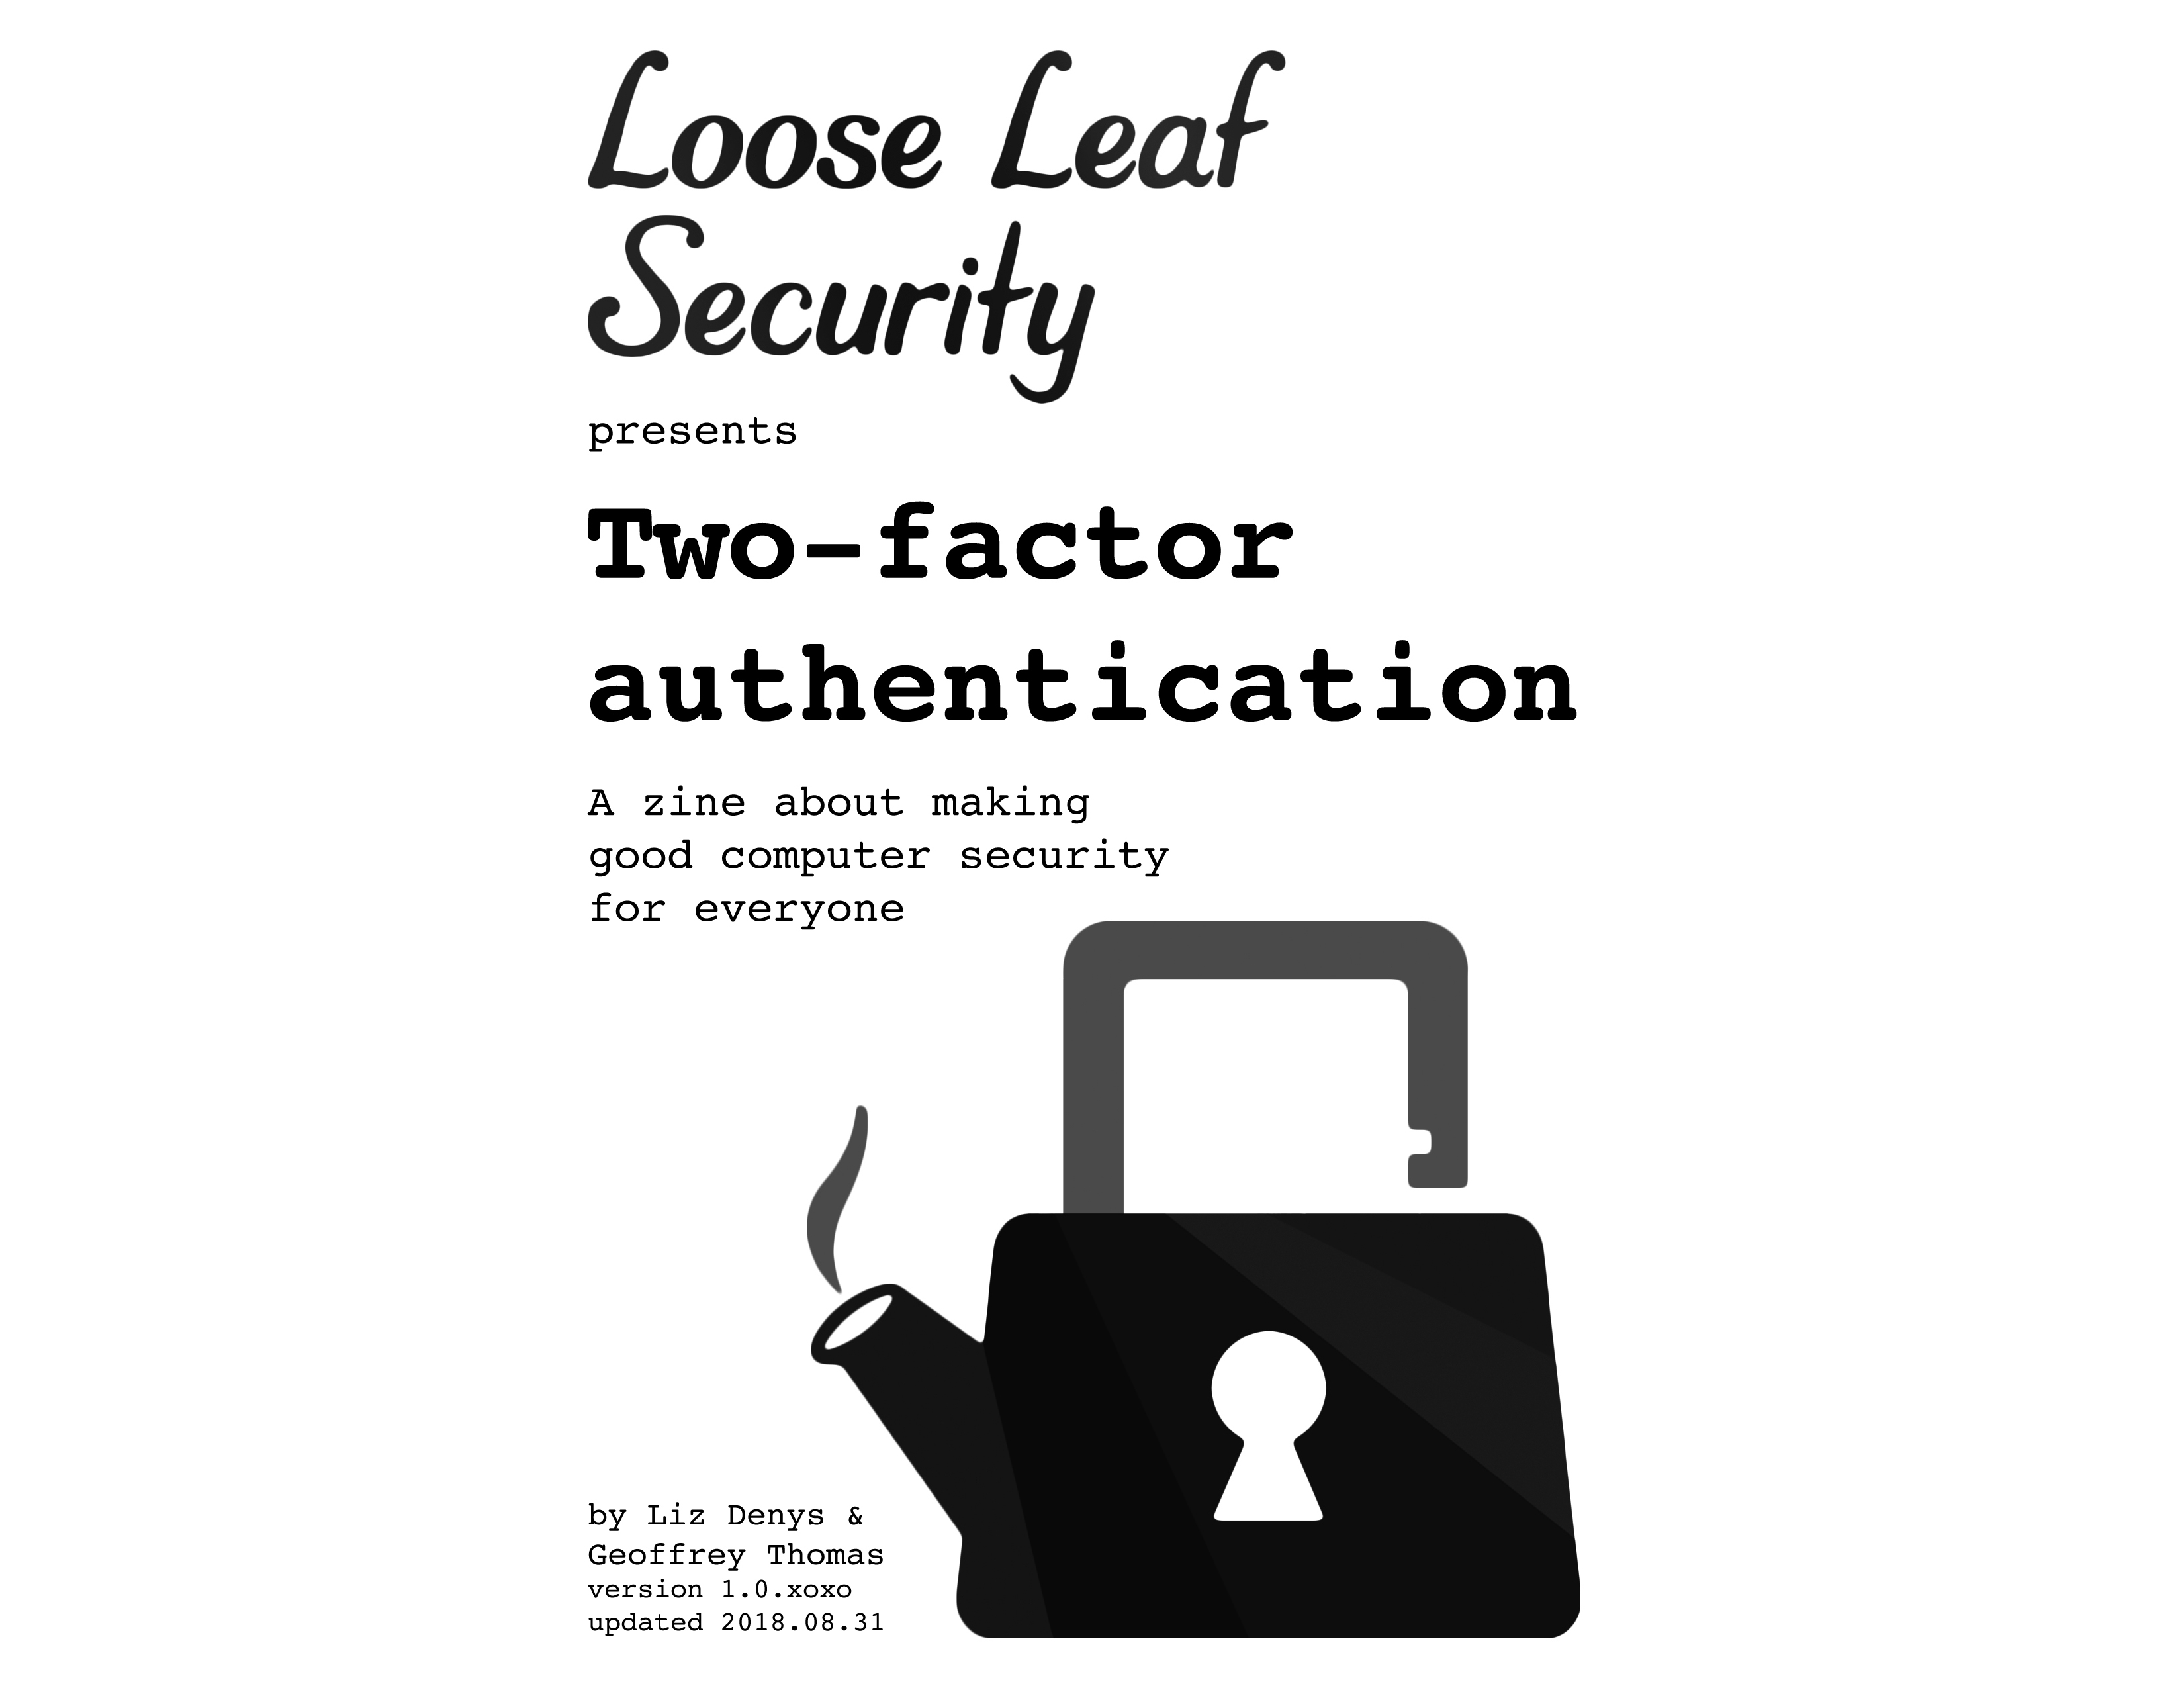 Loose Leaf Security presents two-factor authentication, a zine making good computer security for everyone by Liz Denys & Geoffrey Thomas